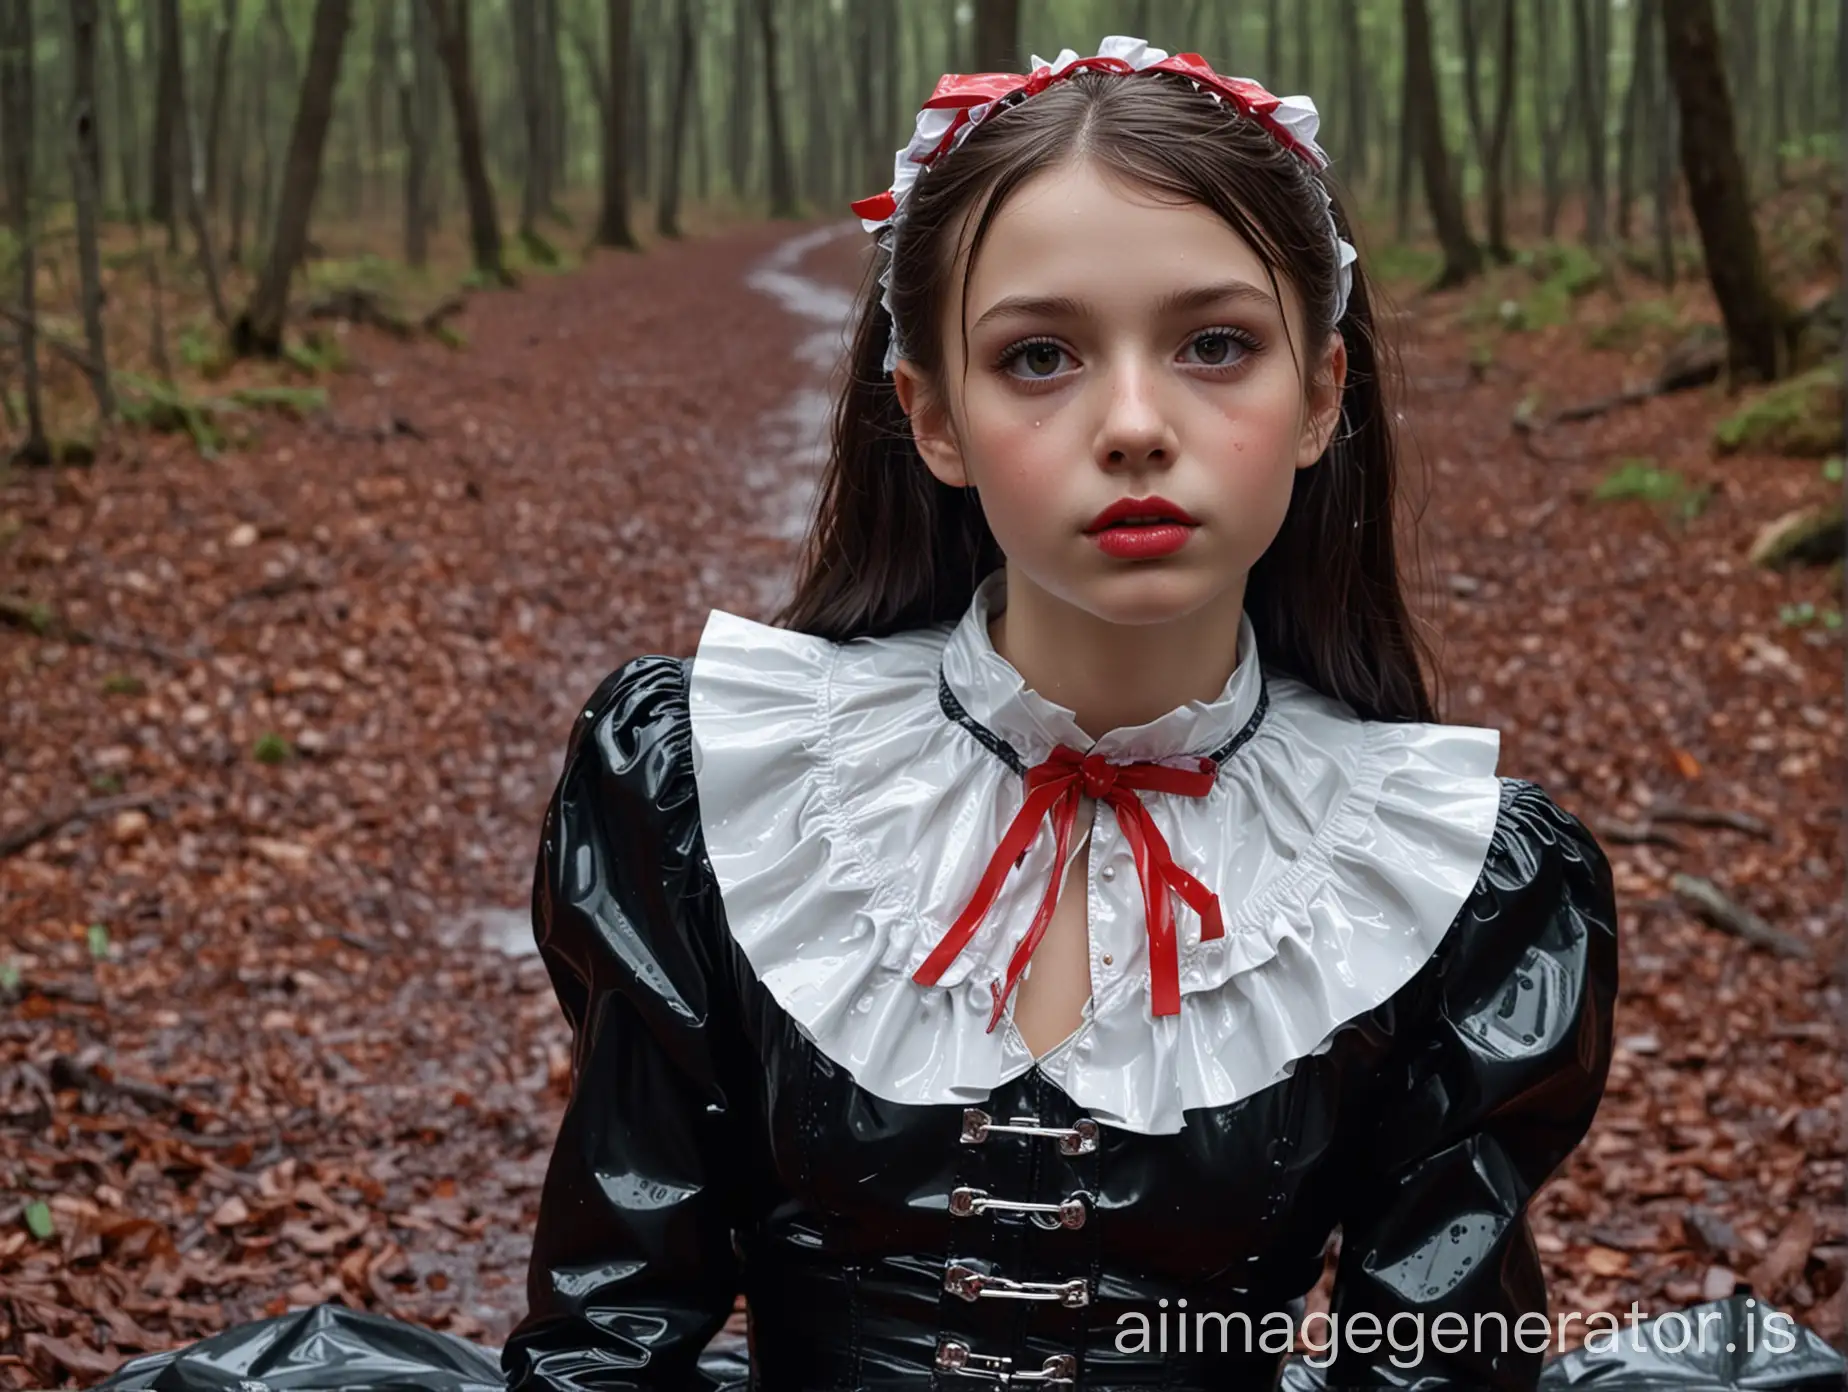 hyperrealistic image in the highest quality. little 10 year old french girl. extremely skinny. extremely white skin. big darkbrown eyes. lips extremely shiny by a lot of red lipgloss. the girl is lying in the forest under heavy rain. face, hair and clothes are totally wet by the rain. she is wearing an extremely shiny red and black latex sweet lolita outfit. collared and fully closed up. shiny latex ribbon over the collar, big shiny latex lolita ribbon in the hair over the dress she wears a shiny latex pinafore. face, hair and clothes are totally wet by the rain. she is wearing an extremely shiny red and black latex sweet lolita outfit. collared and fully closed up. shiny latex ribbon over the collar, big shiny latex lolita ribbon in the hair over the dress she wears a shiny latex pinafore.  she wears no jewellery. no elements of metal or stone